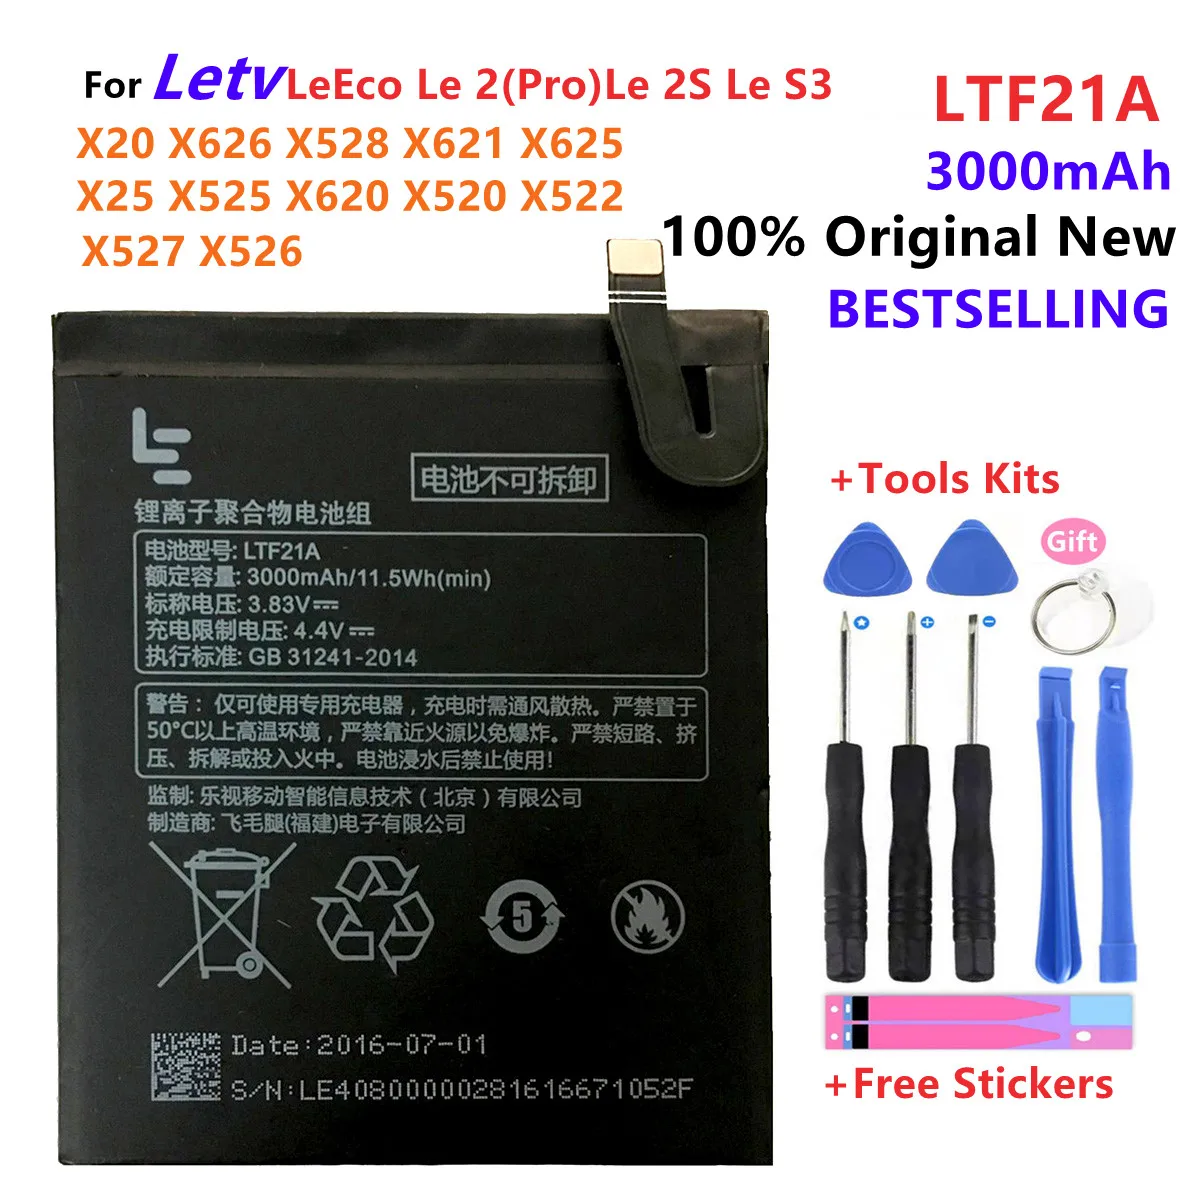 

New Letv LeEco Le 2 X620 Battery 3000mAh LTF21A Battery for Letv Le 2 Pro / Letv X520 phone Battery Replacement Batteries+Tools